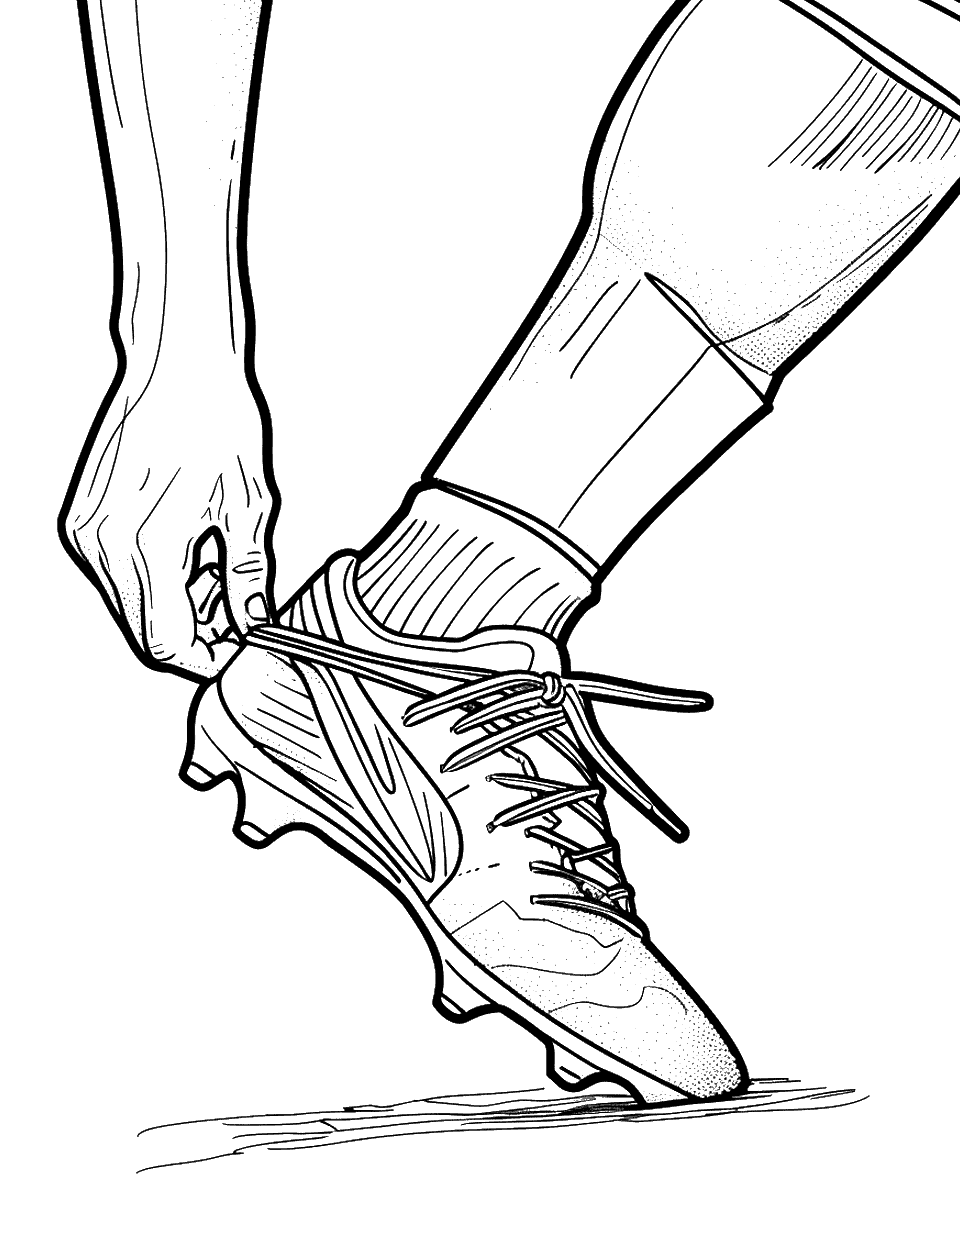 Soccer Cleat Tying Coloring Page - A close-up of a player tying their soccer cleat lace, getting ready to play.